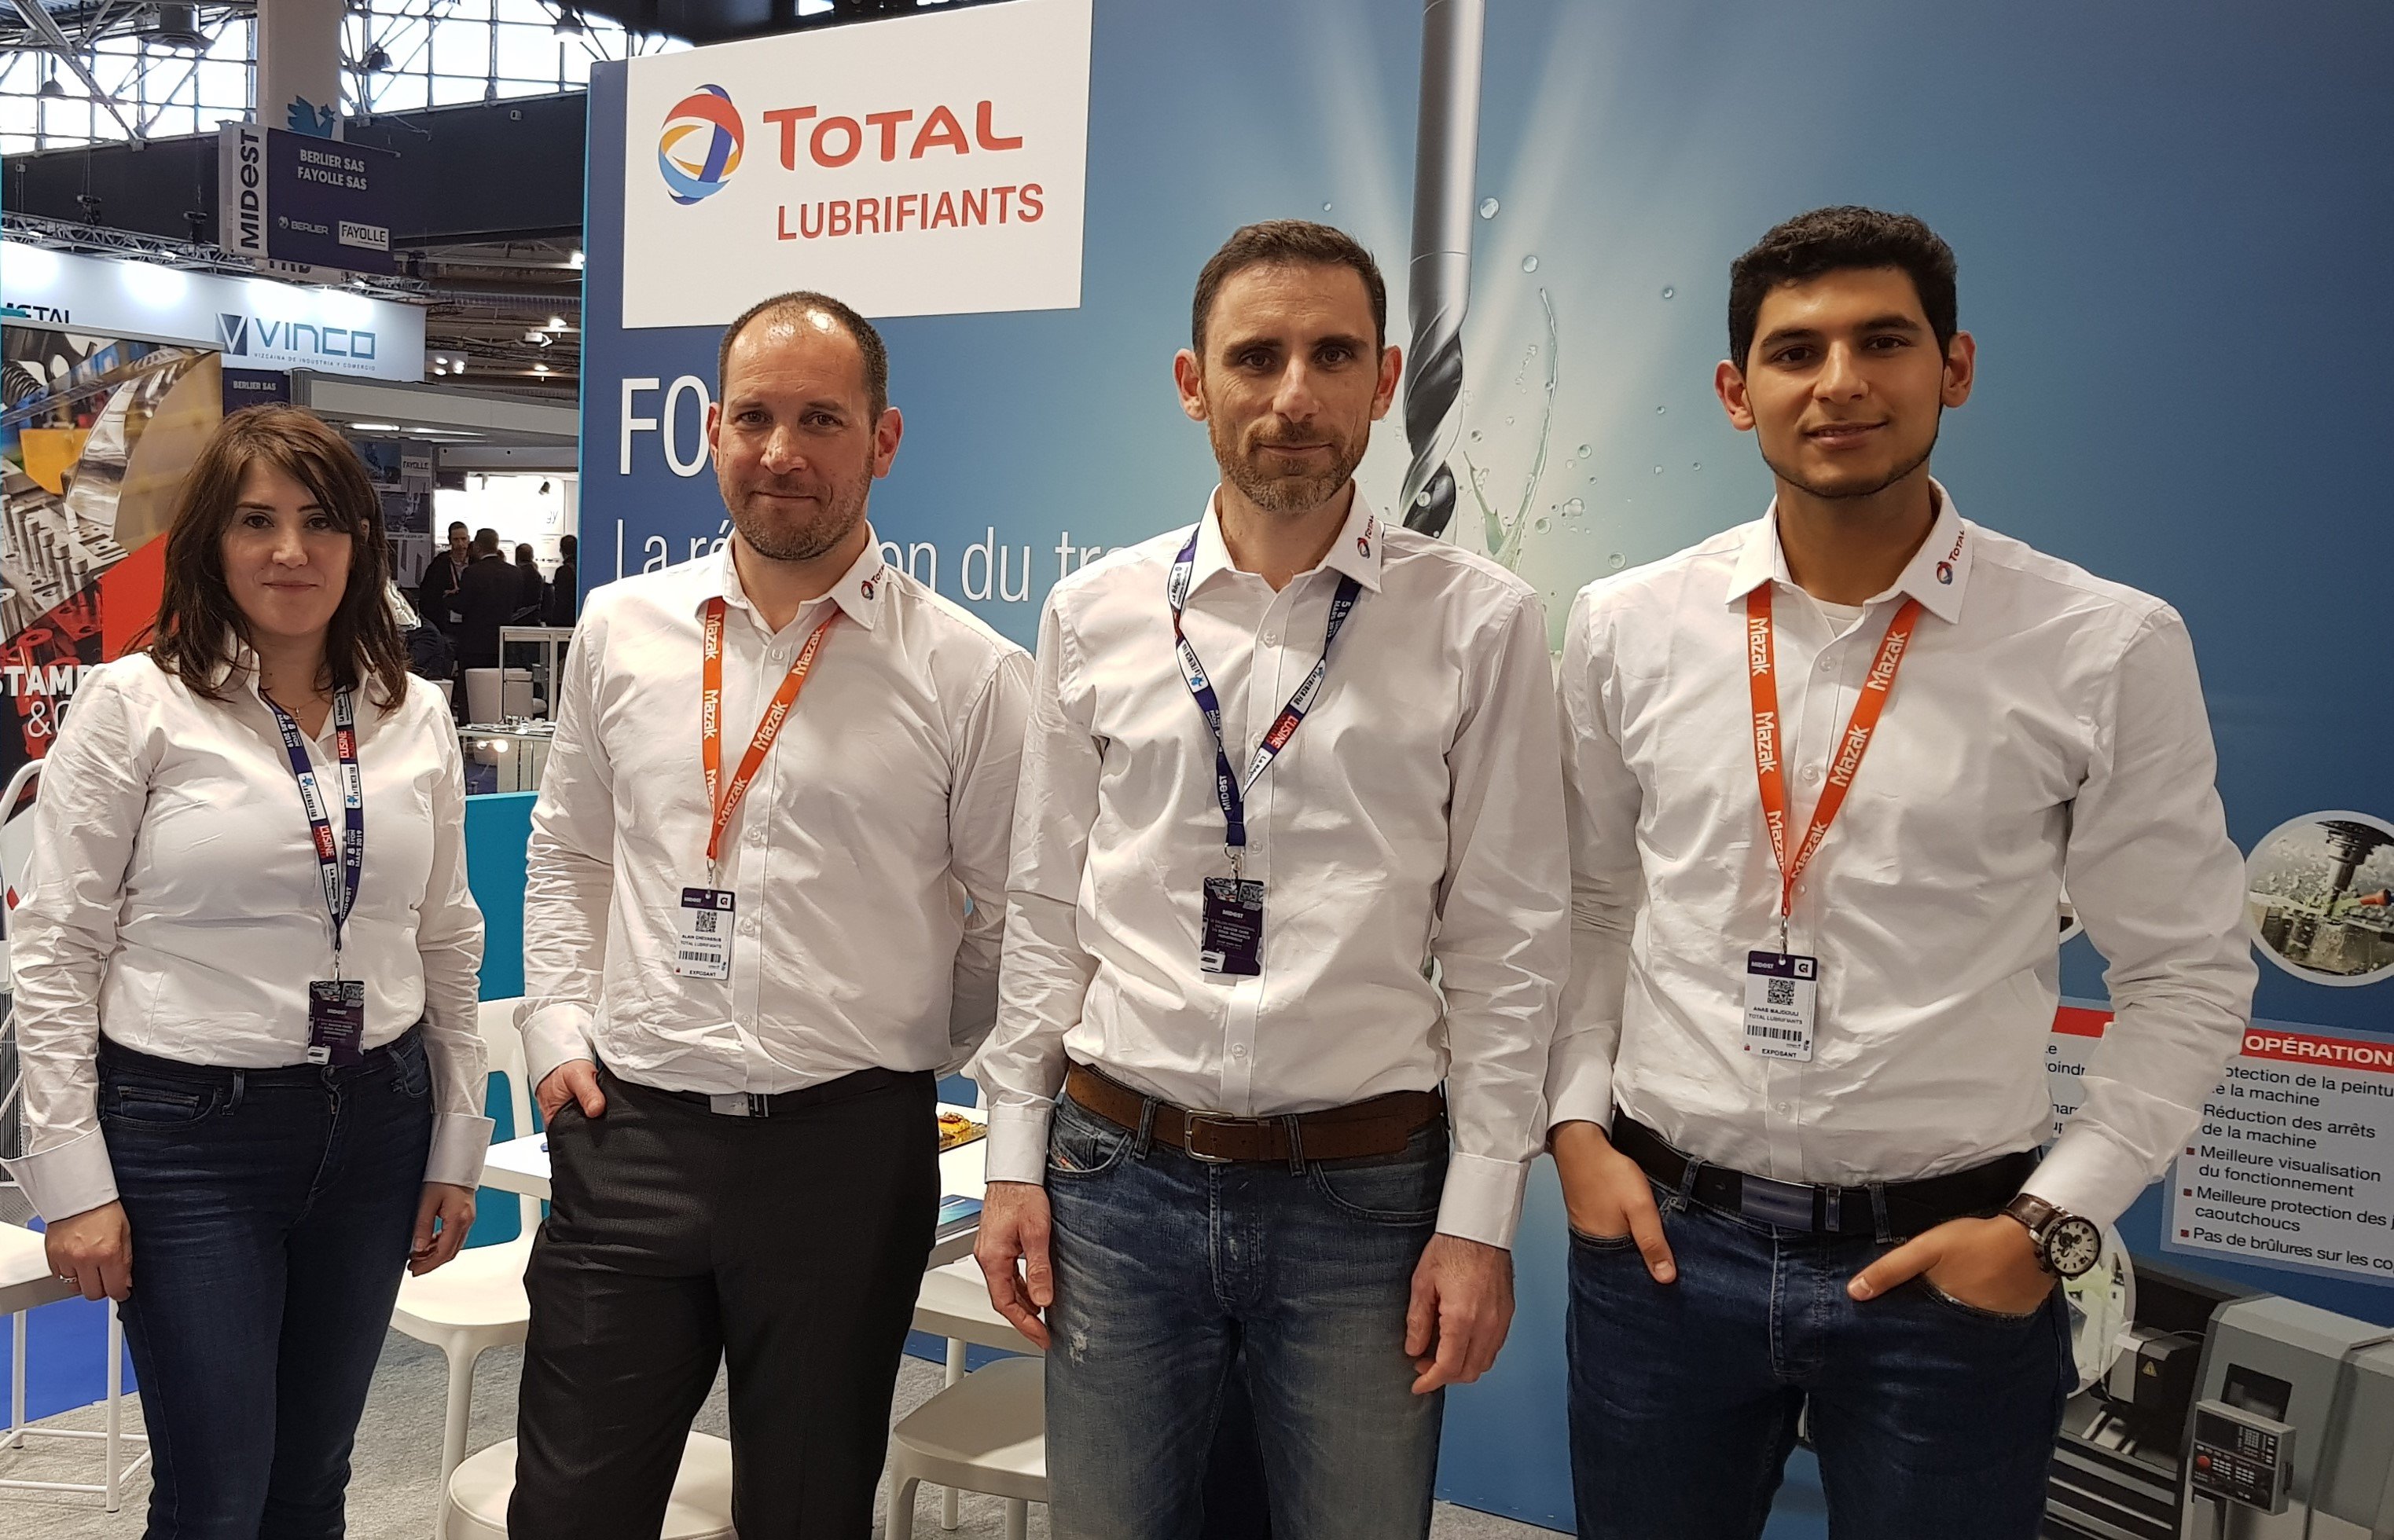 Total Lubrifiants was at the 2019 Global Industrie exhibition
